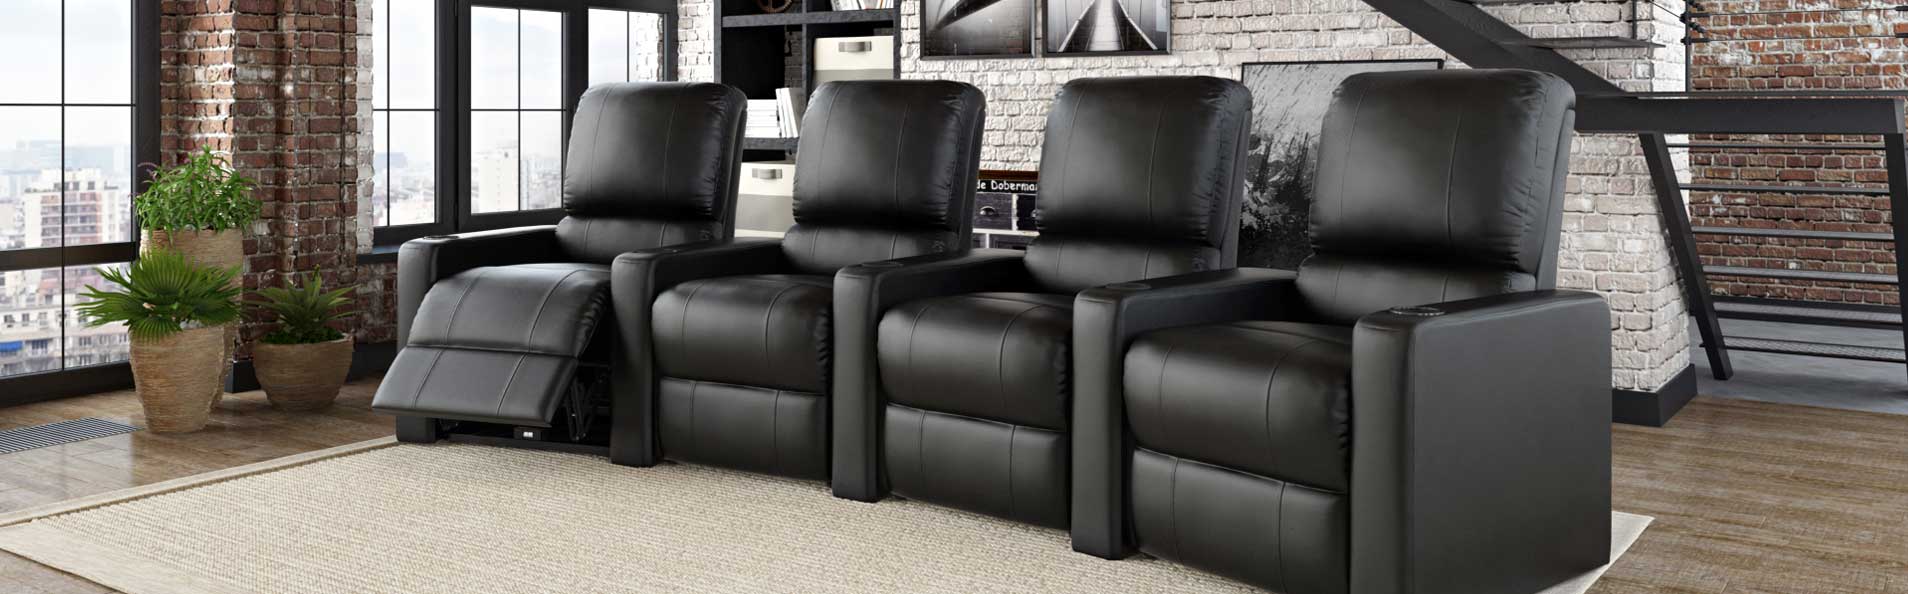 caring and cleaning bonded leather